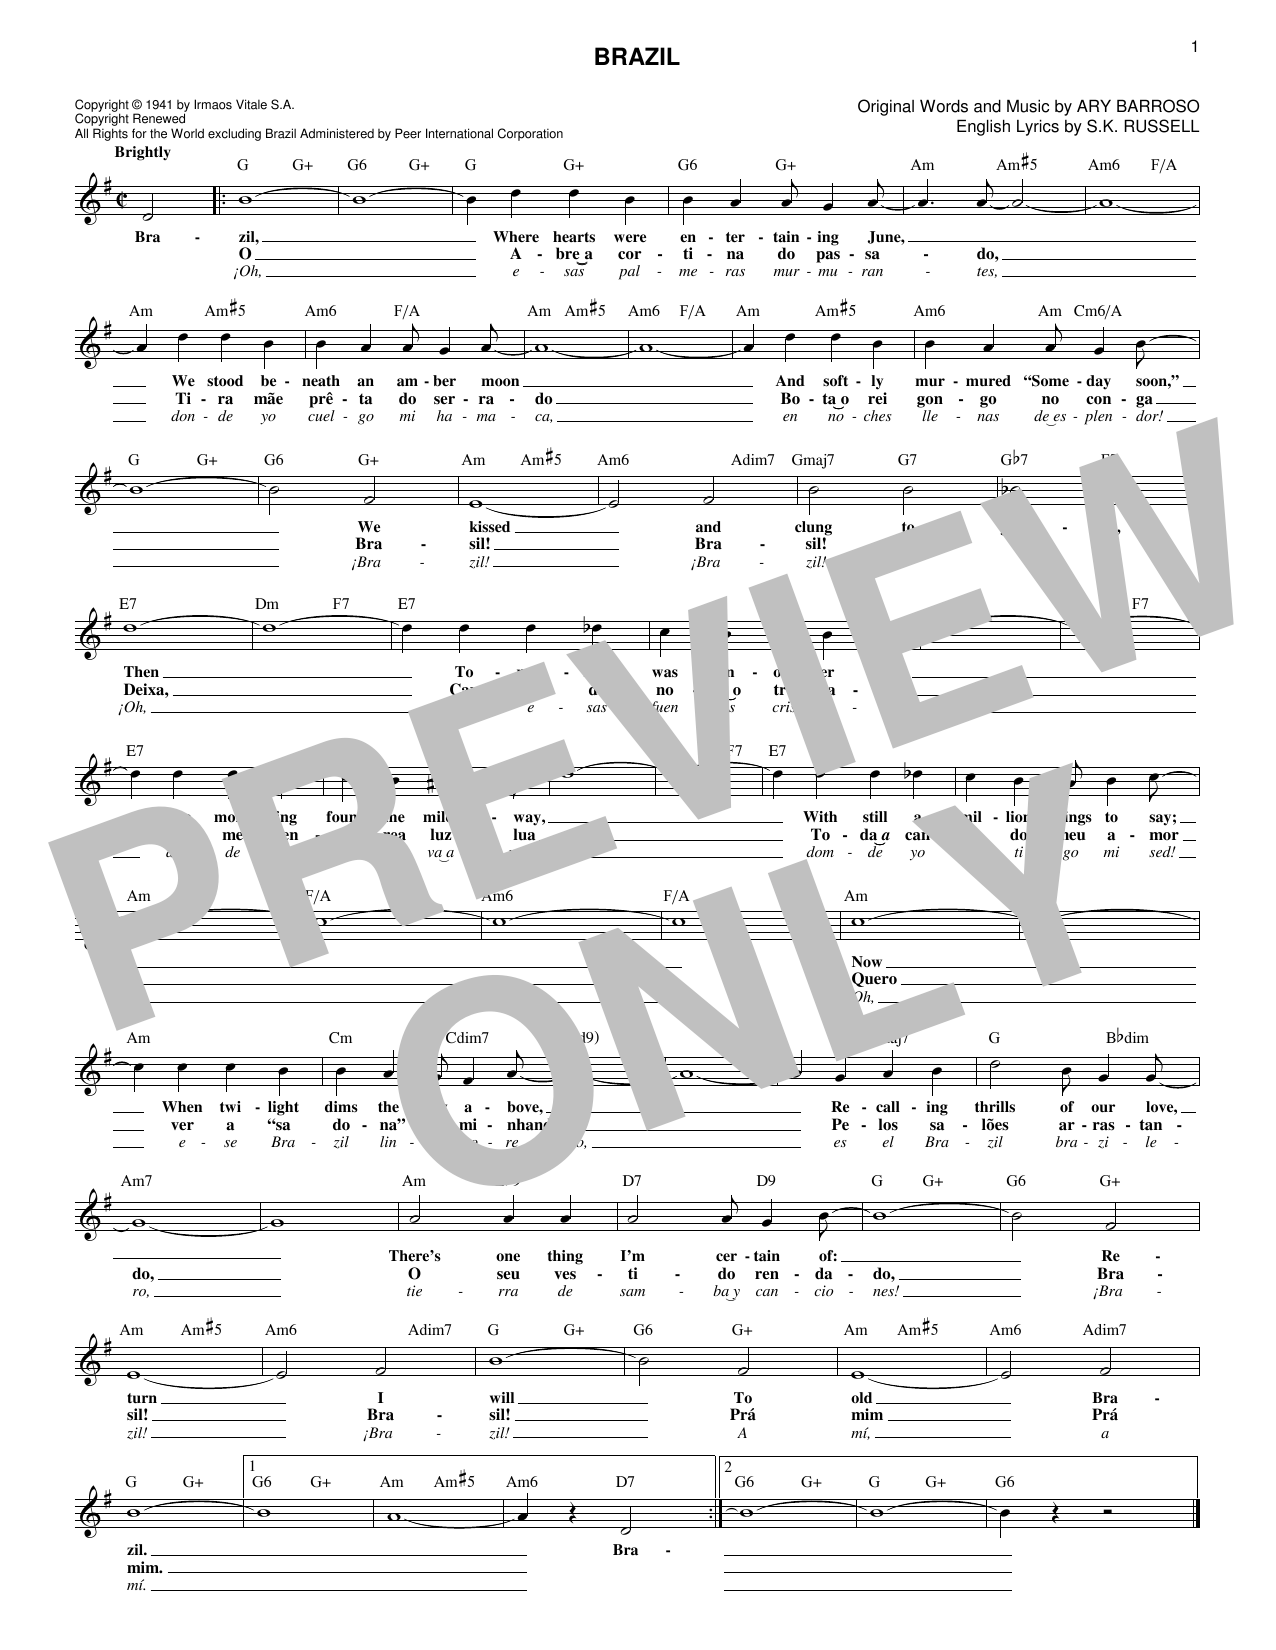 Download The Ritchie Family Brazil Sheet Music